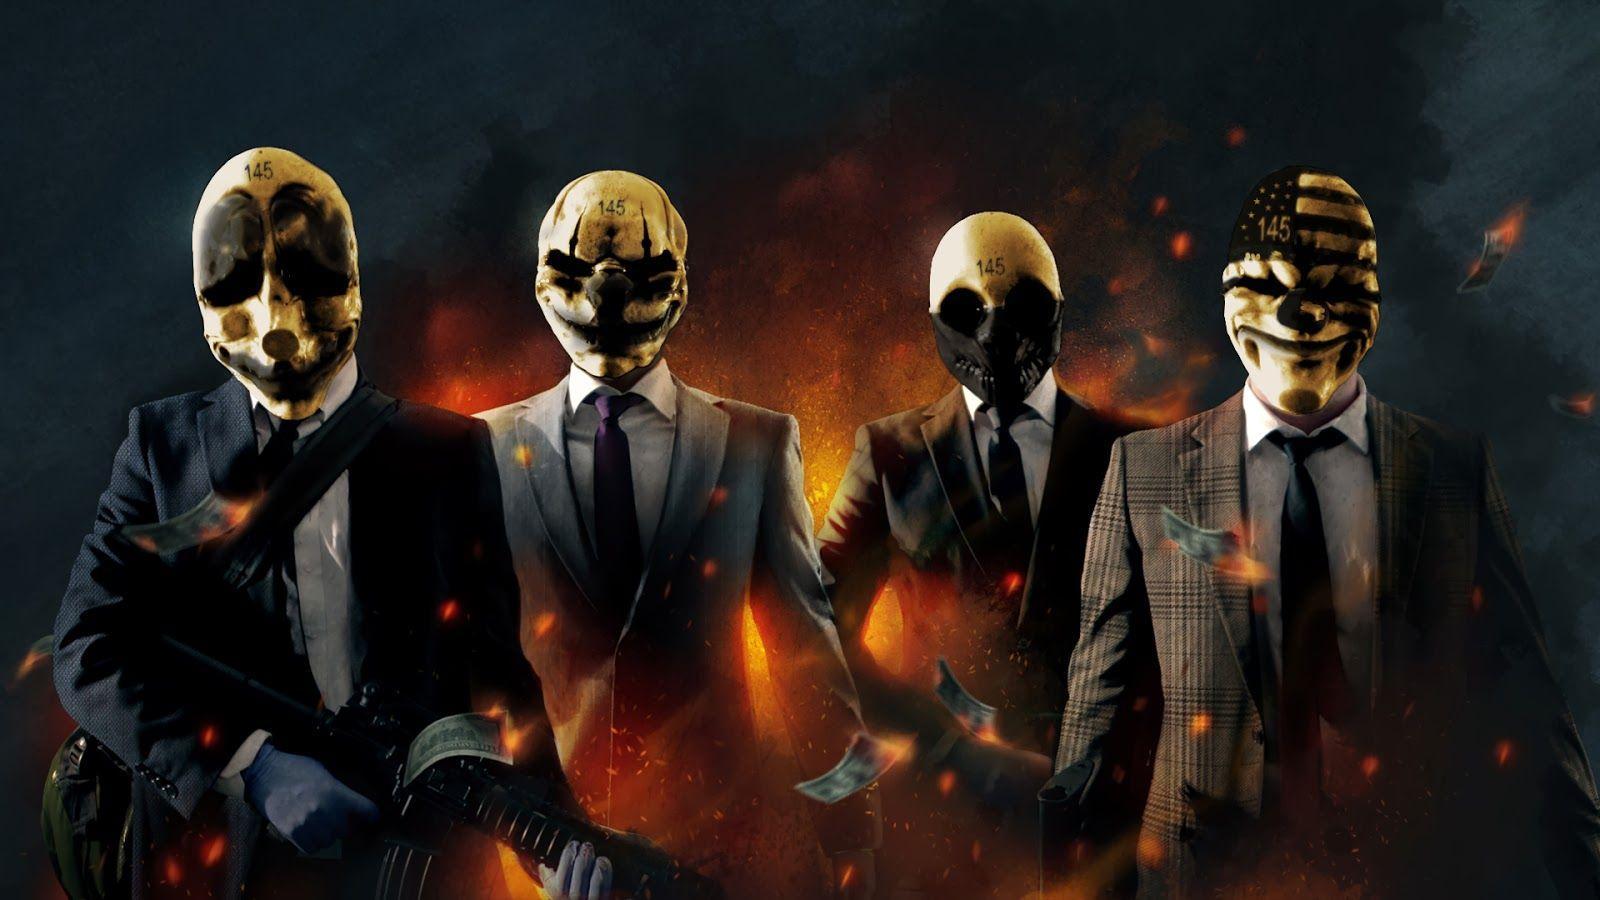 Payday 2 Wallpaper, Payday 2 Picture 1920x1080 px